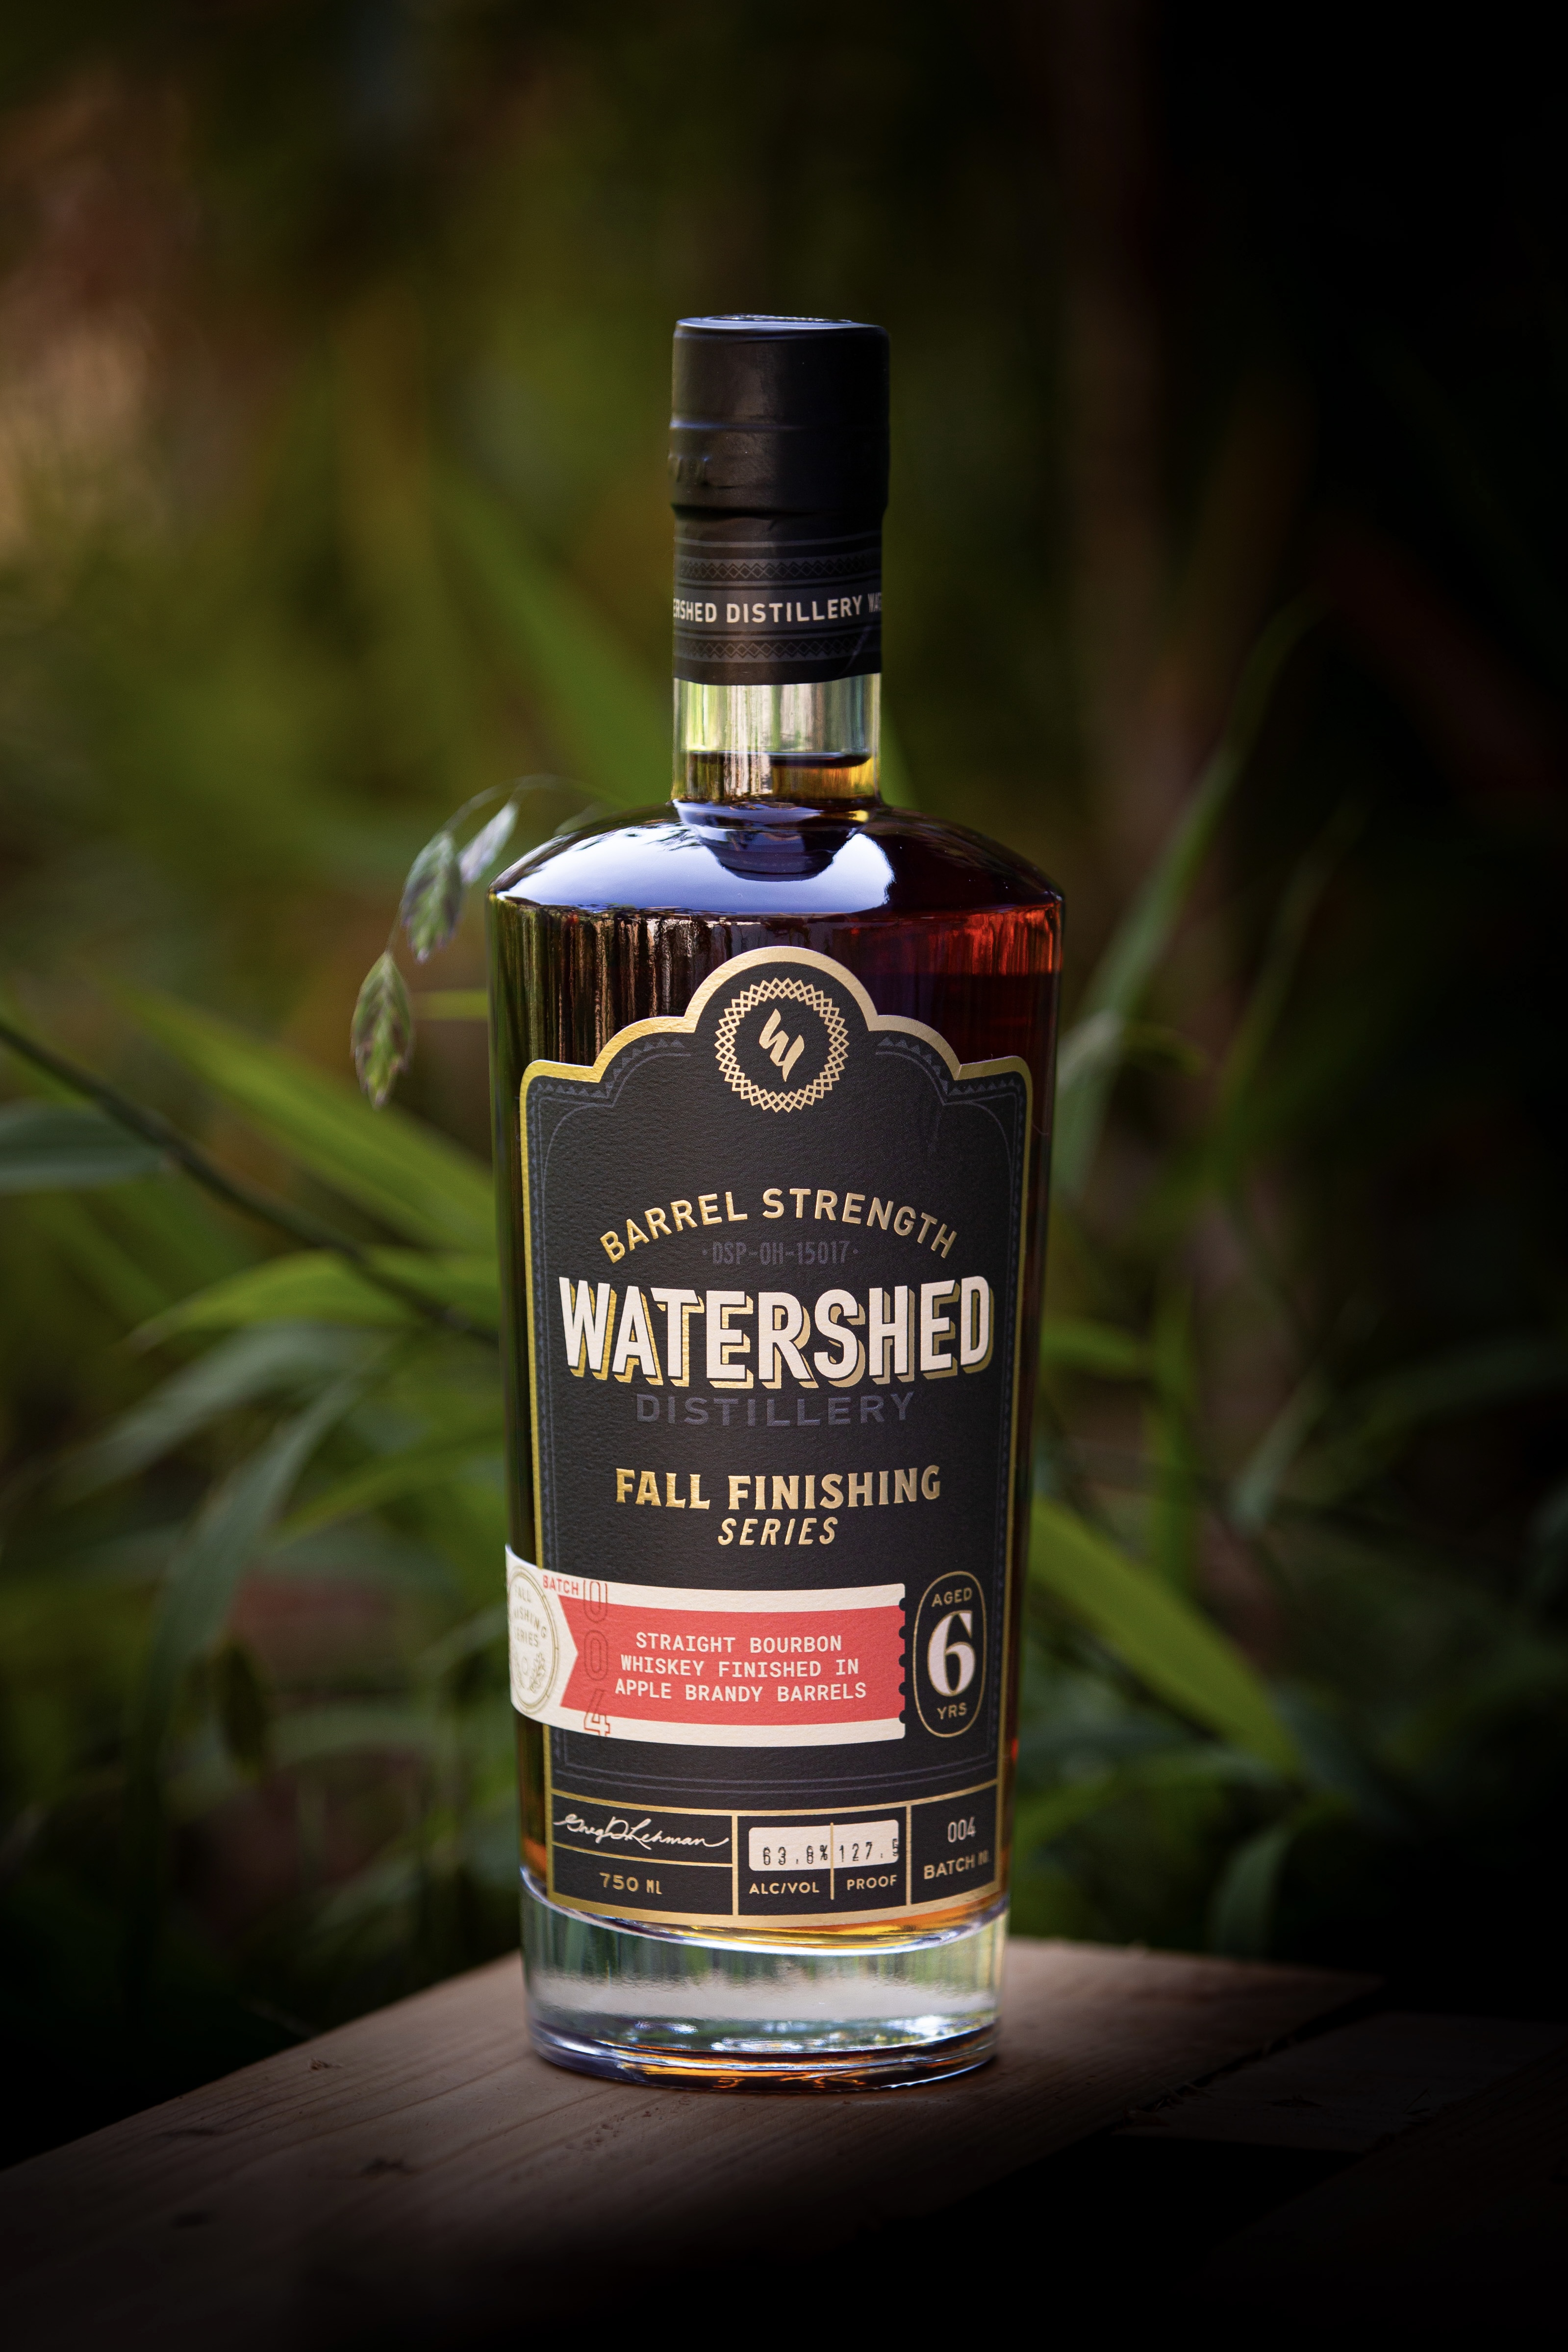 Watershed Distillery Releases New Apple Brandy-Finished Bourbon